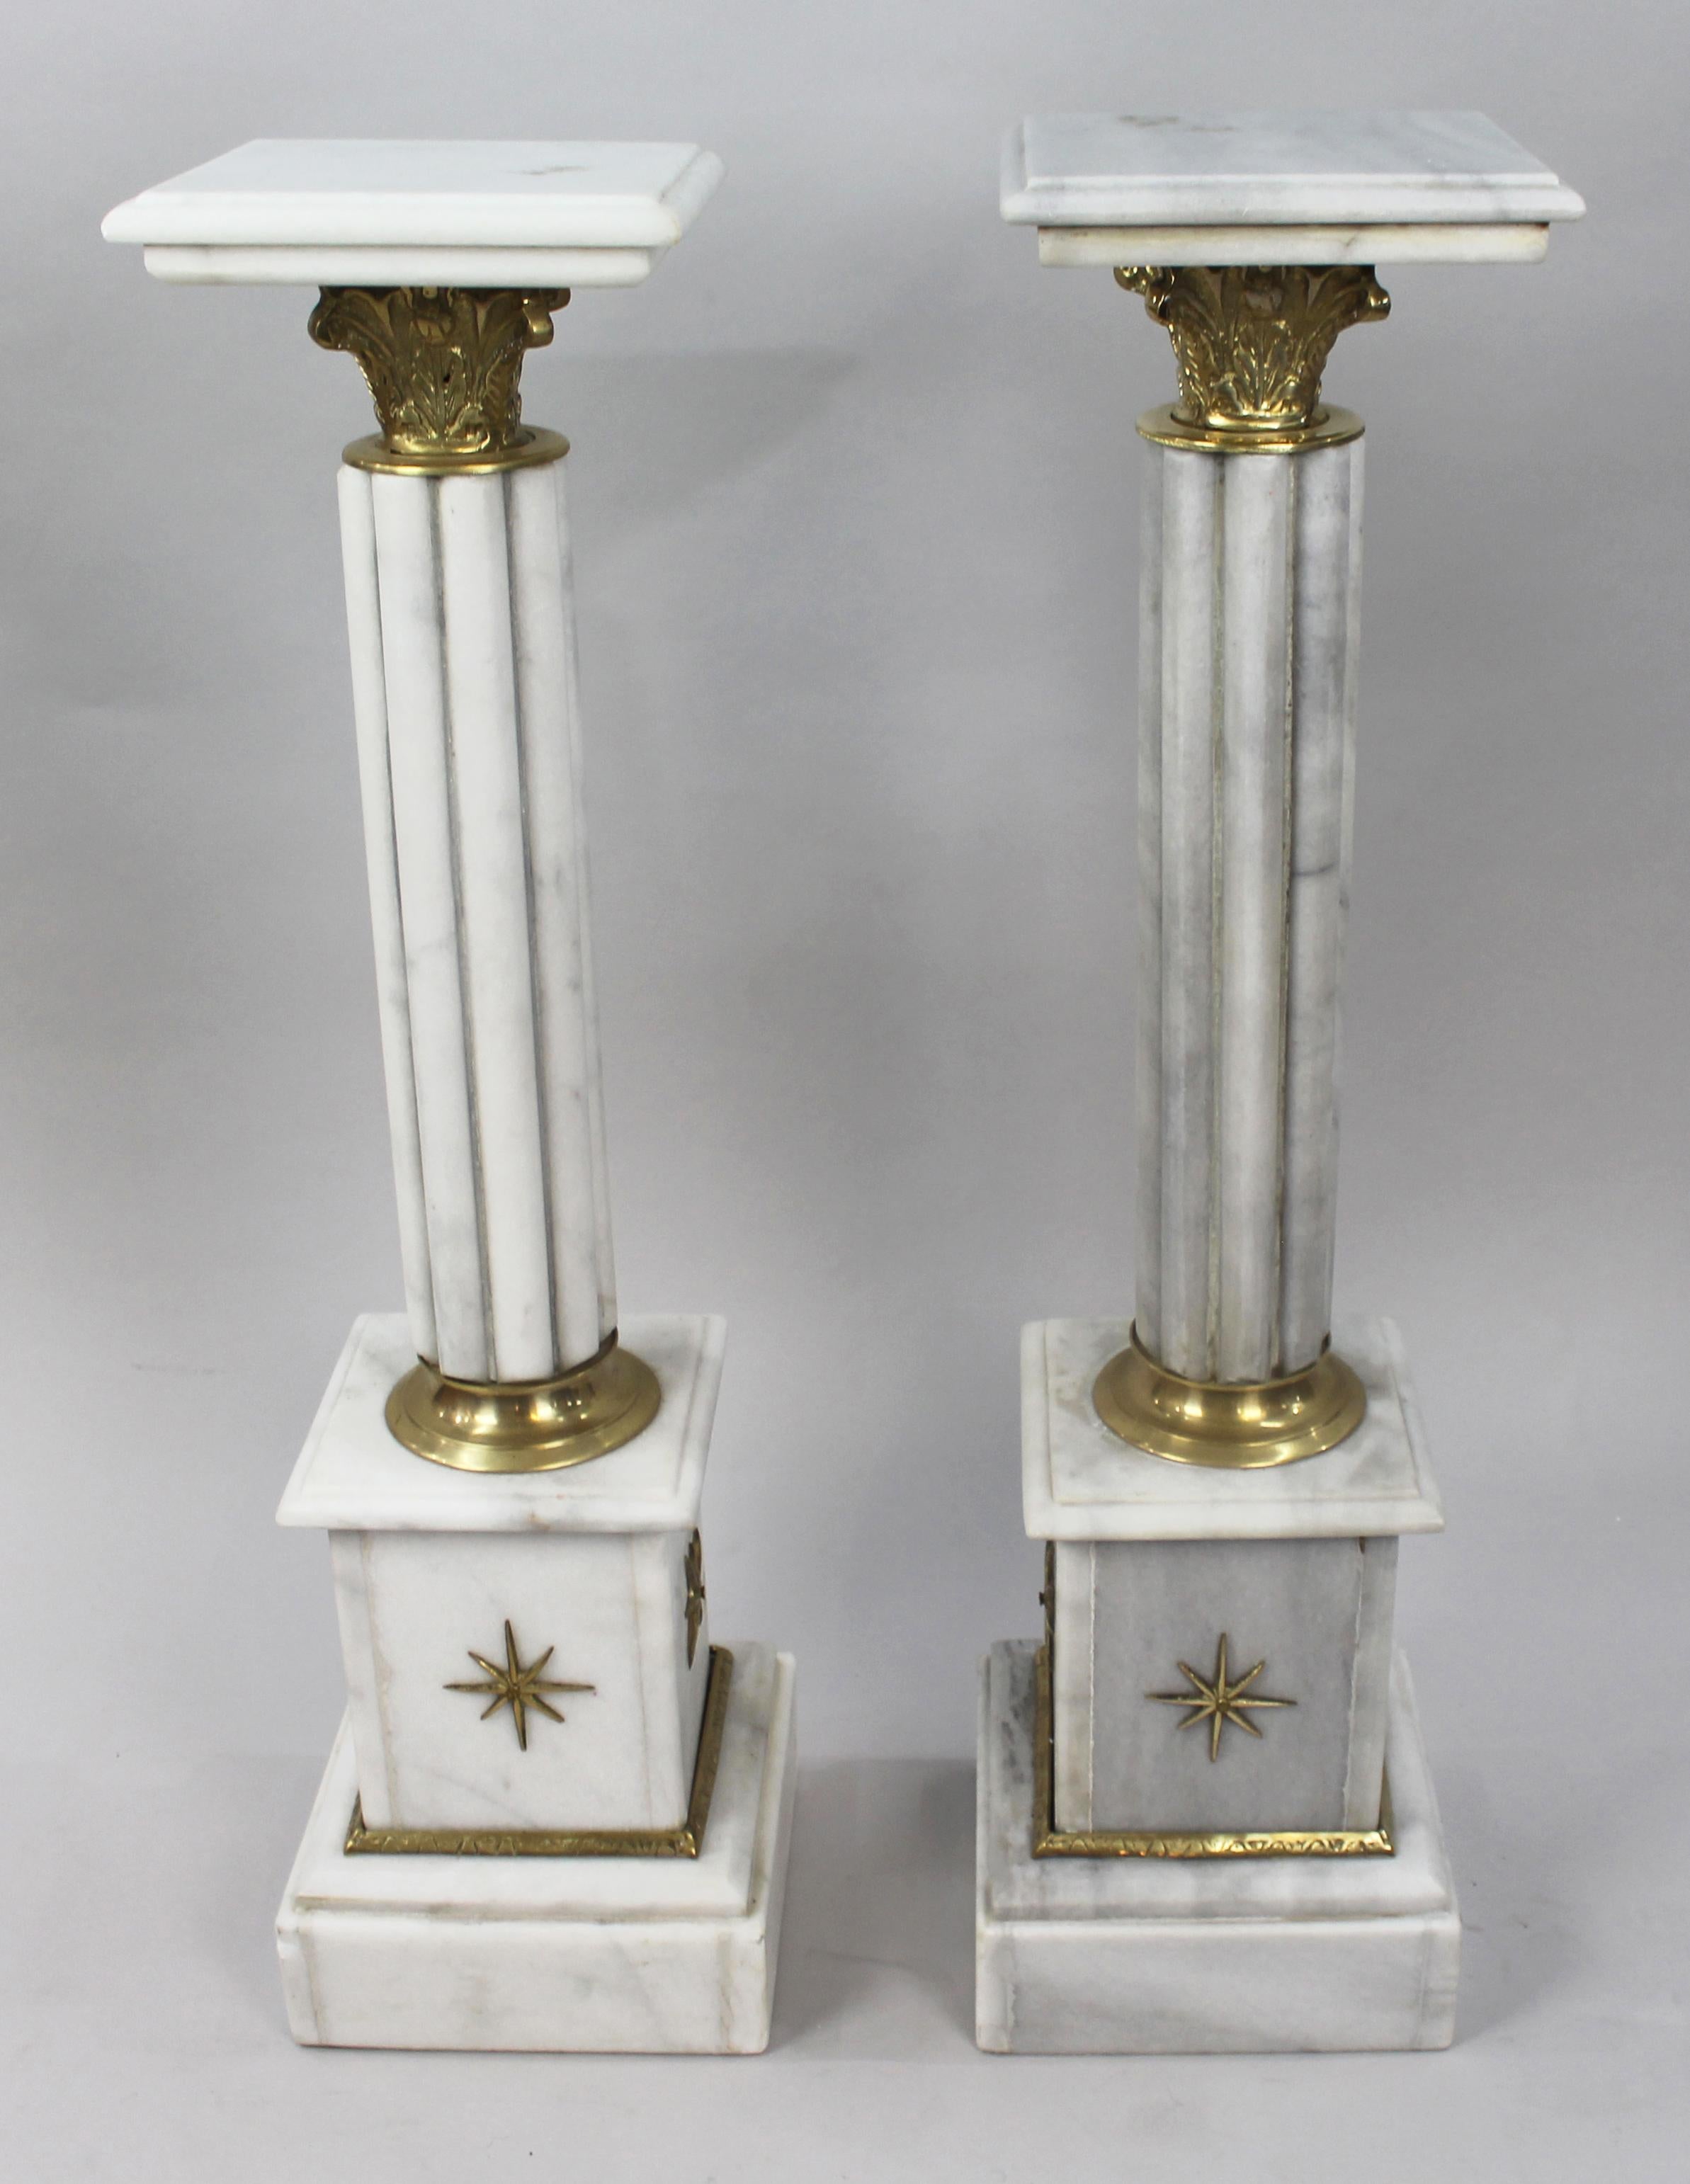 Pair of Ornate French marble column pedestals 


Measures: Width: 27 cm. 

Top 22 cm square. 

Height: 99 cm

Very heavy pair of attractive marble columns

Gilt capital, fluted column

Fabulous interior display items.